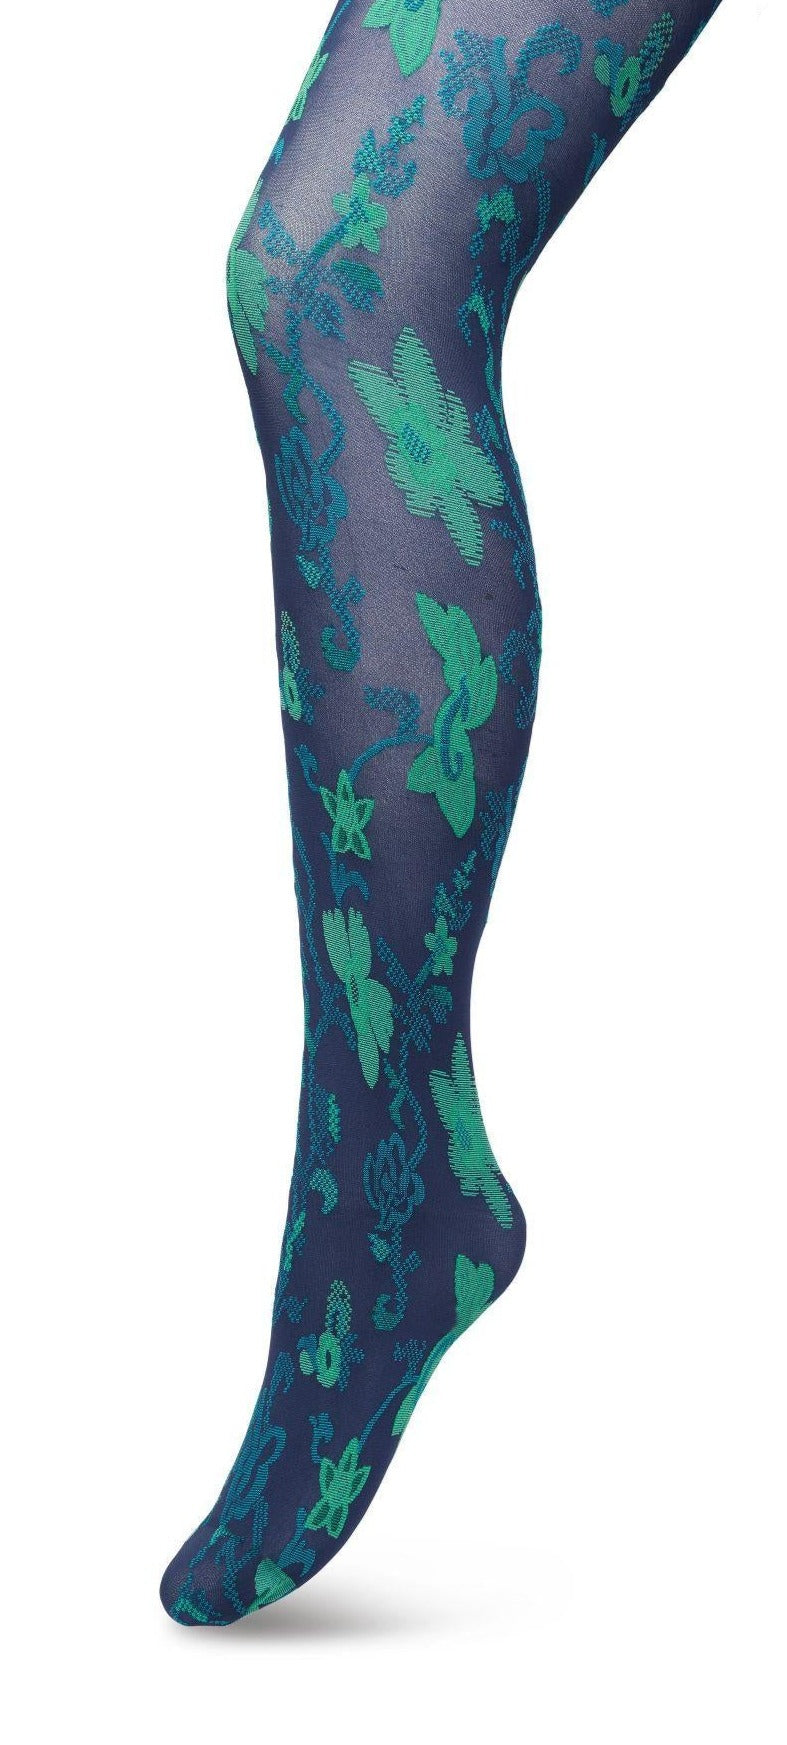 Bonnie Doon BP221905 Floral Ornament Tights - Navy opaque fashion tights with a woven floral vine pattern in teal blue and turquoise green